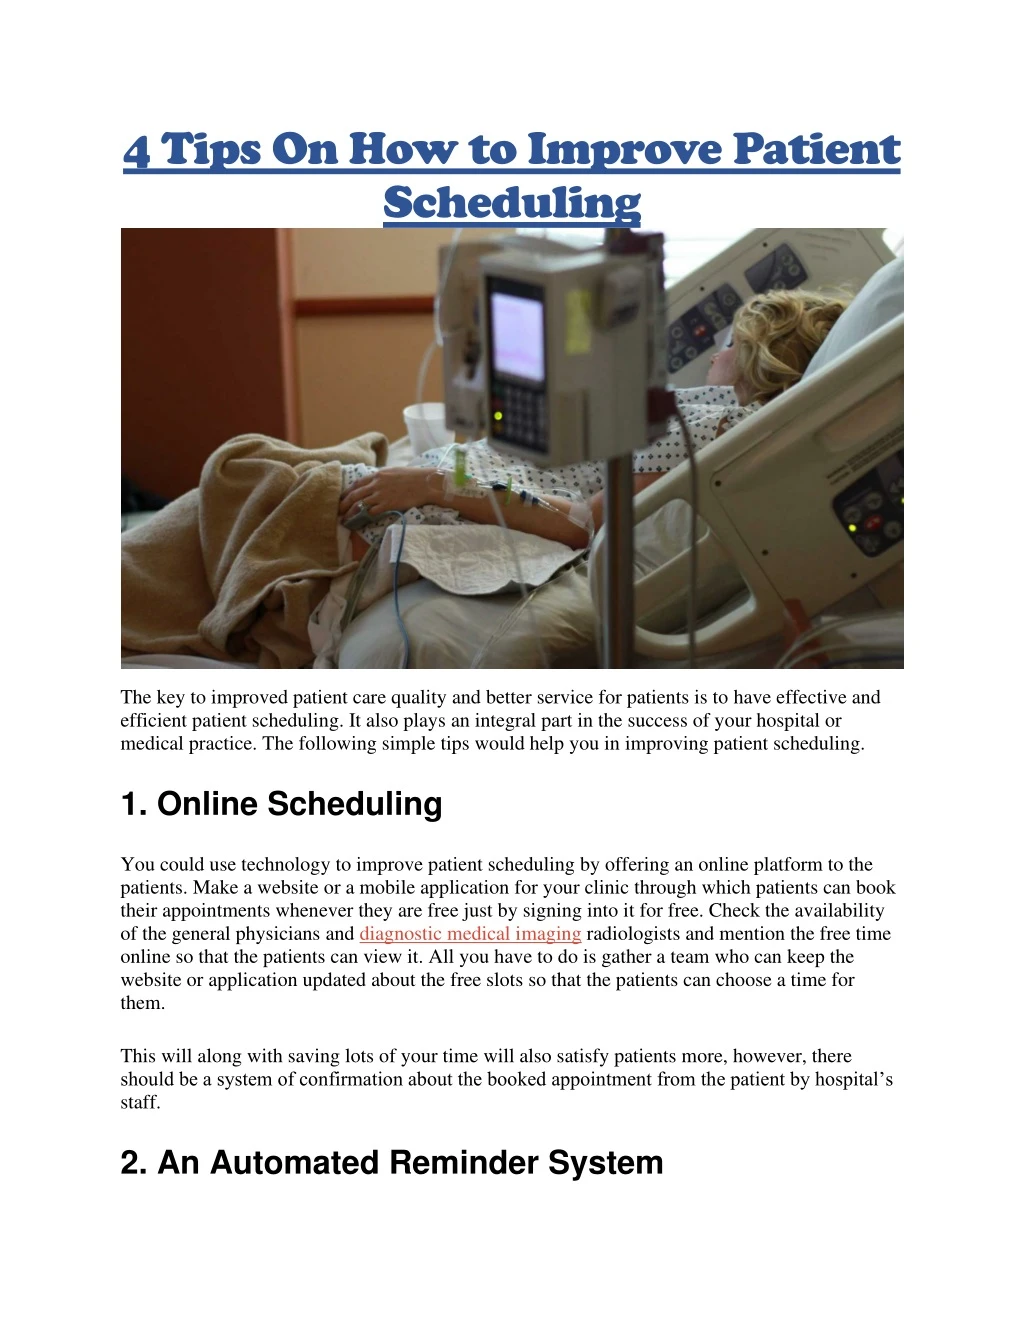 4 tips on how to improve patient scheduling